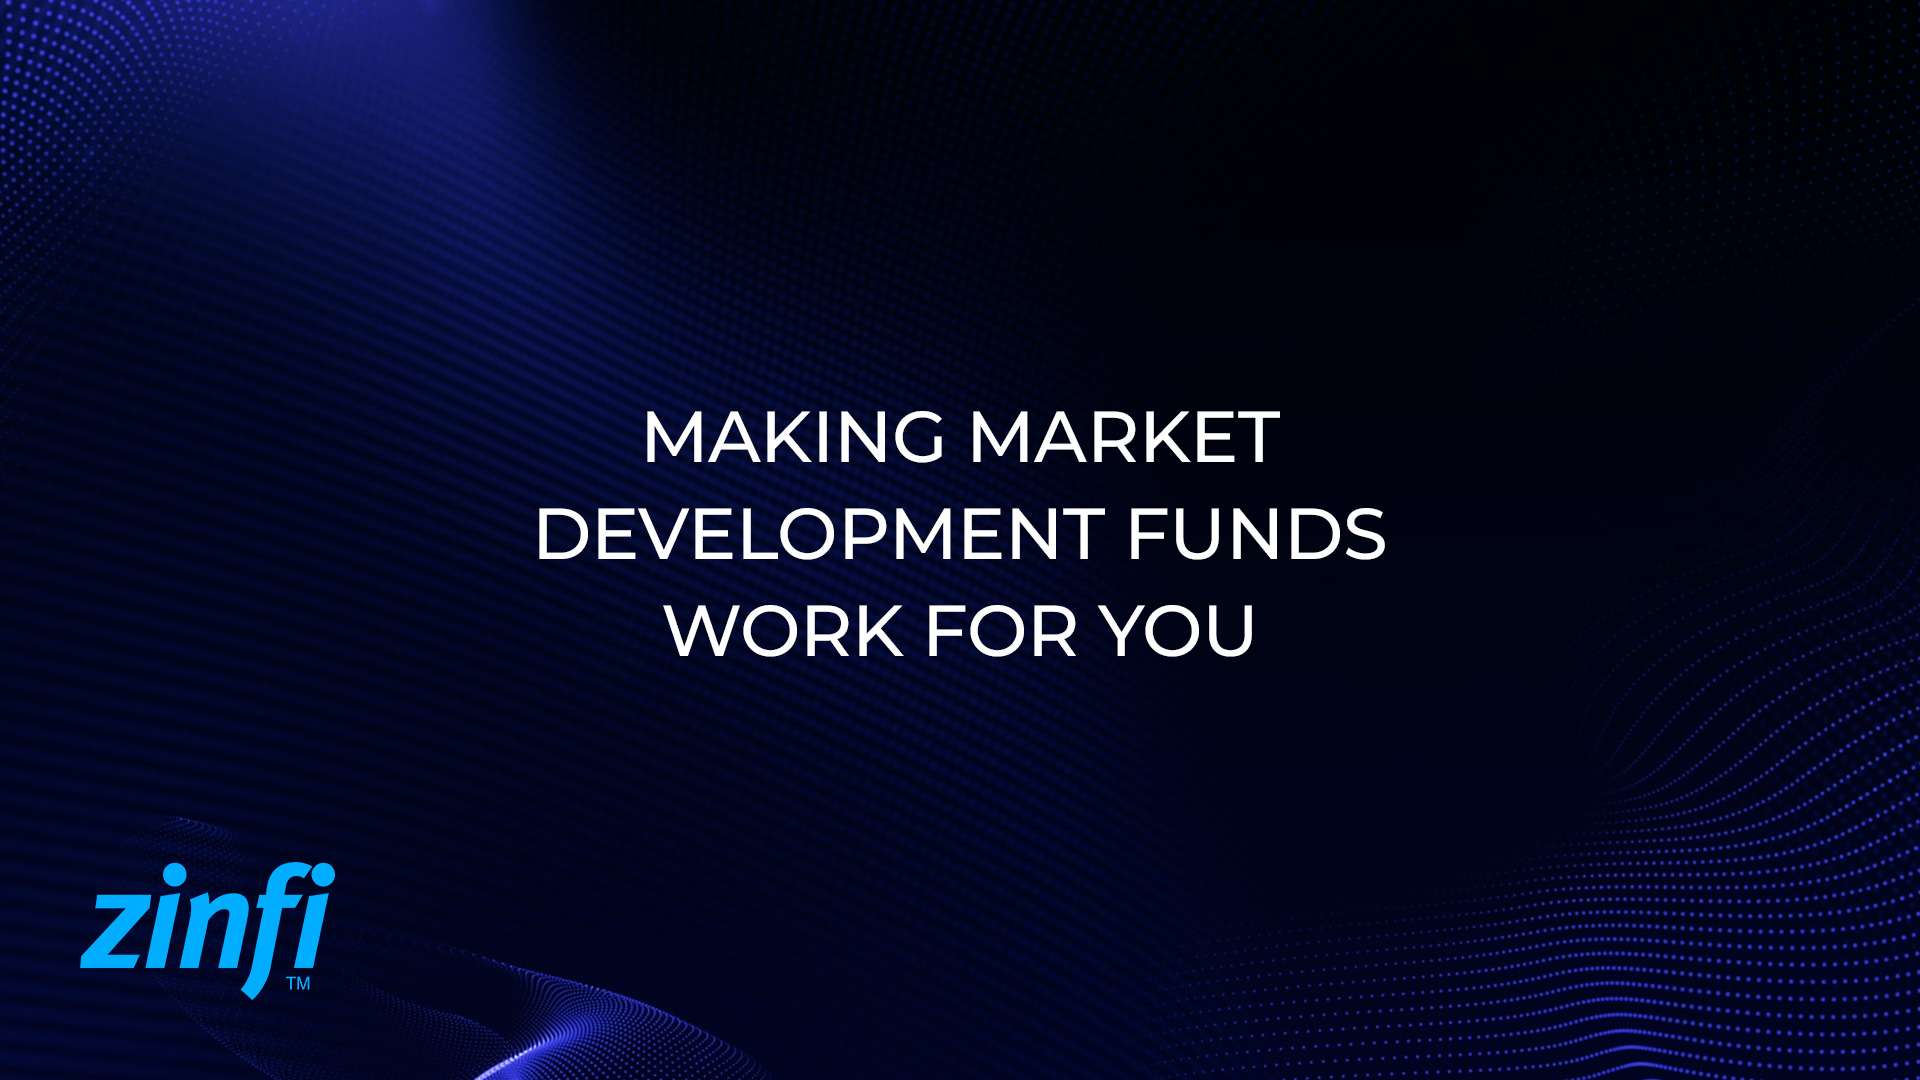 Thumbnail image for video - Making Market Development Funds Work for You